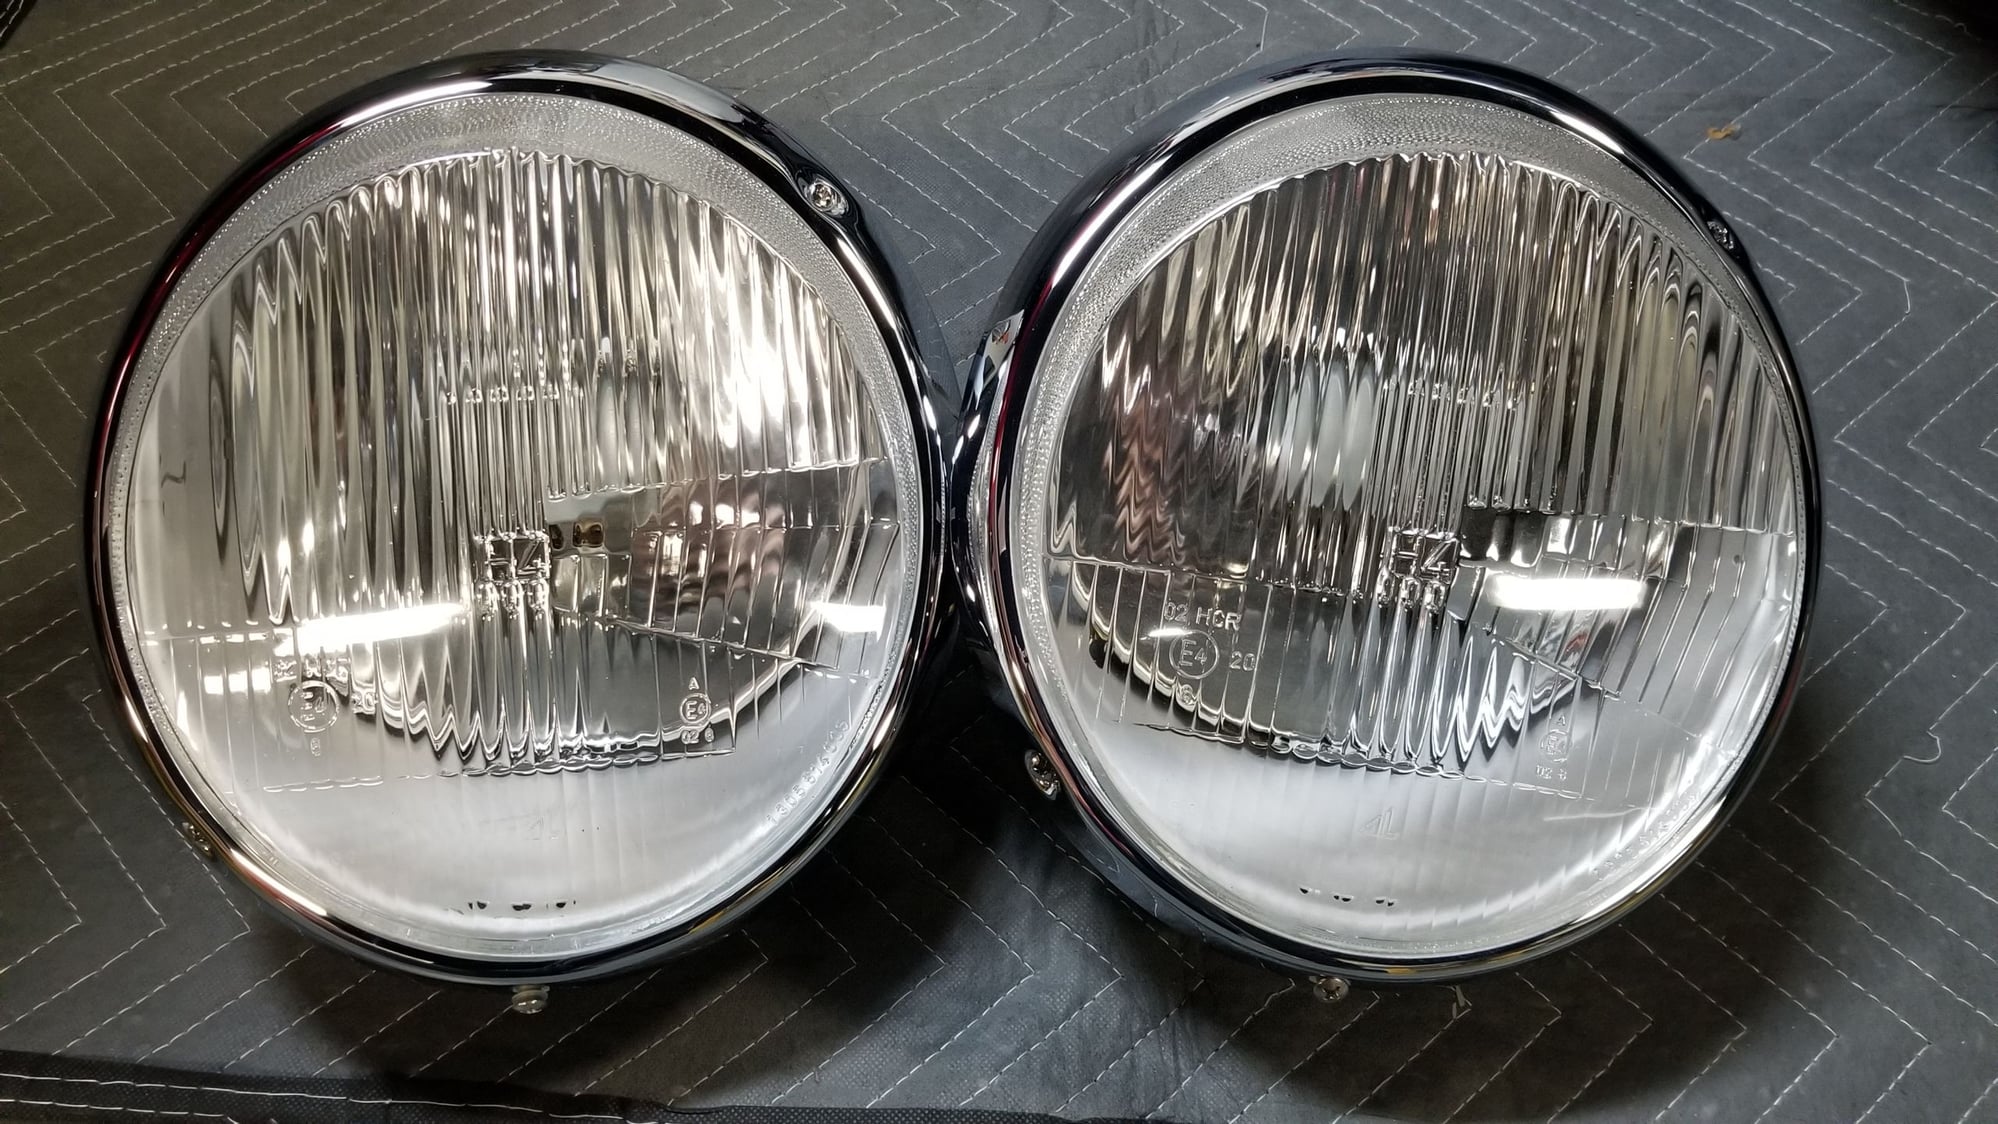 Lights - Euro H4 Headlights Set, mint/complete, w chrome and primered trim rings, seals, bulbs - Used - 1980 to 1994 Porsche 911 - Corte Madera, CA 94925, United States